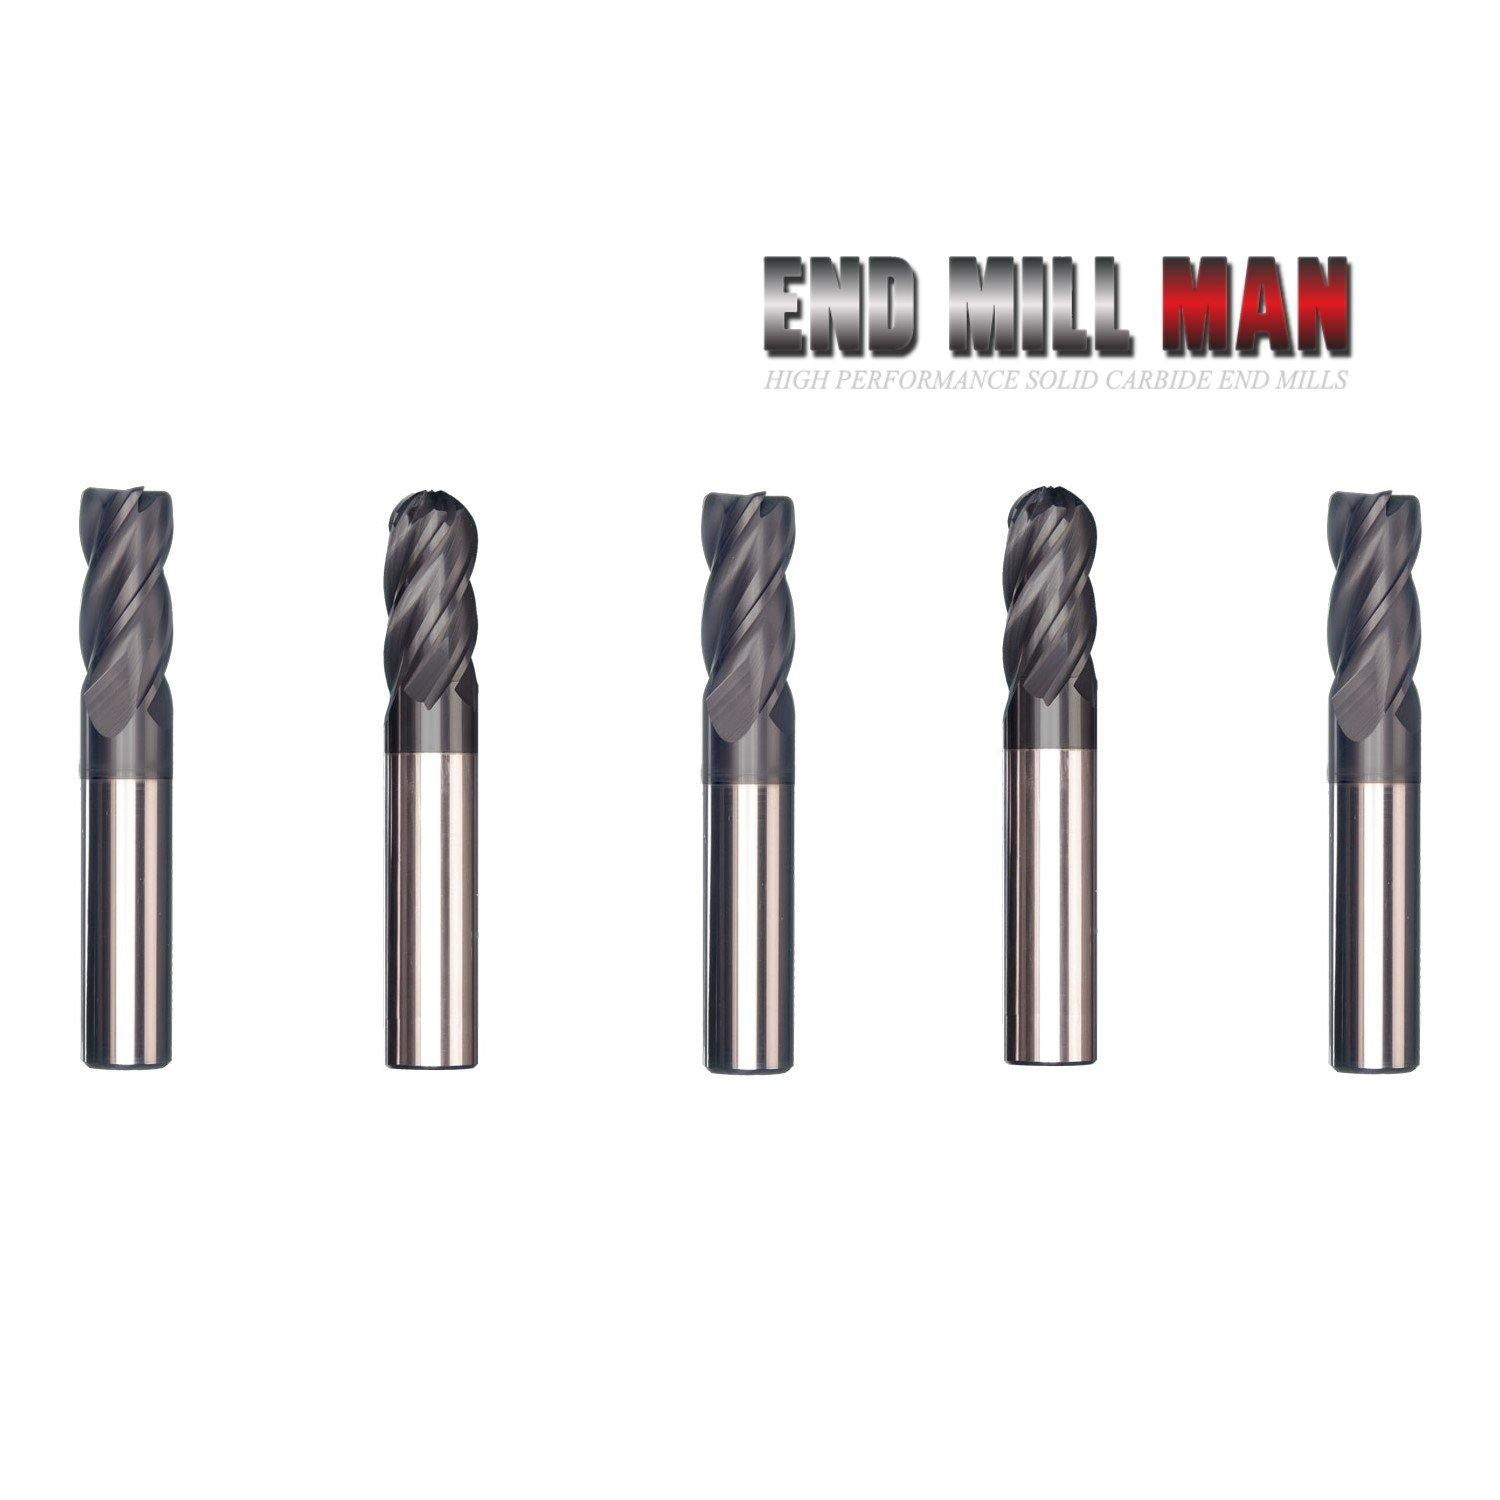 (5 Pack) 3/8" x 1" x 2-1/2" Variable Helix High Performance Carbide End Mill - The End Mill Store 